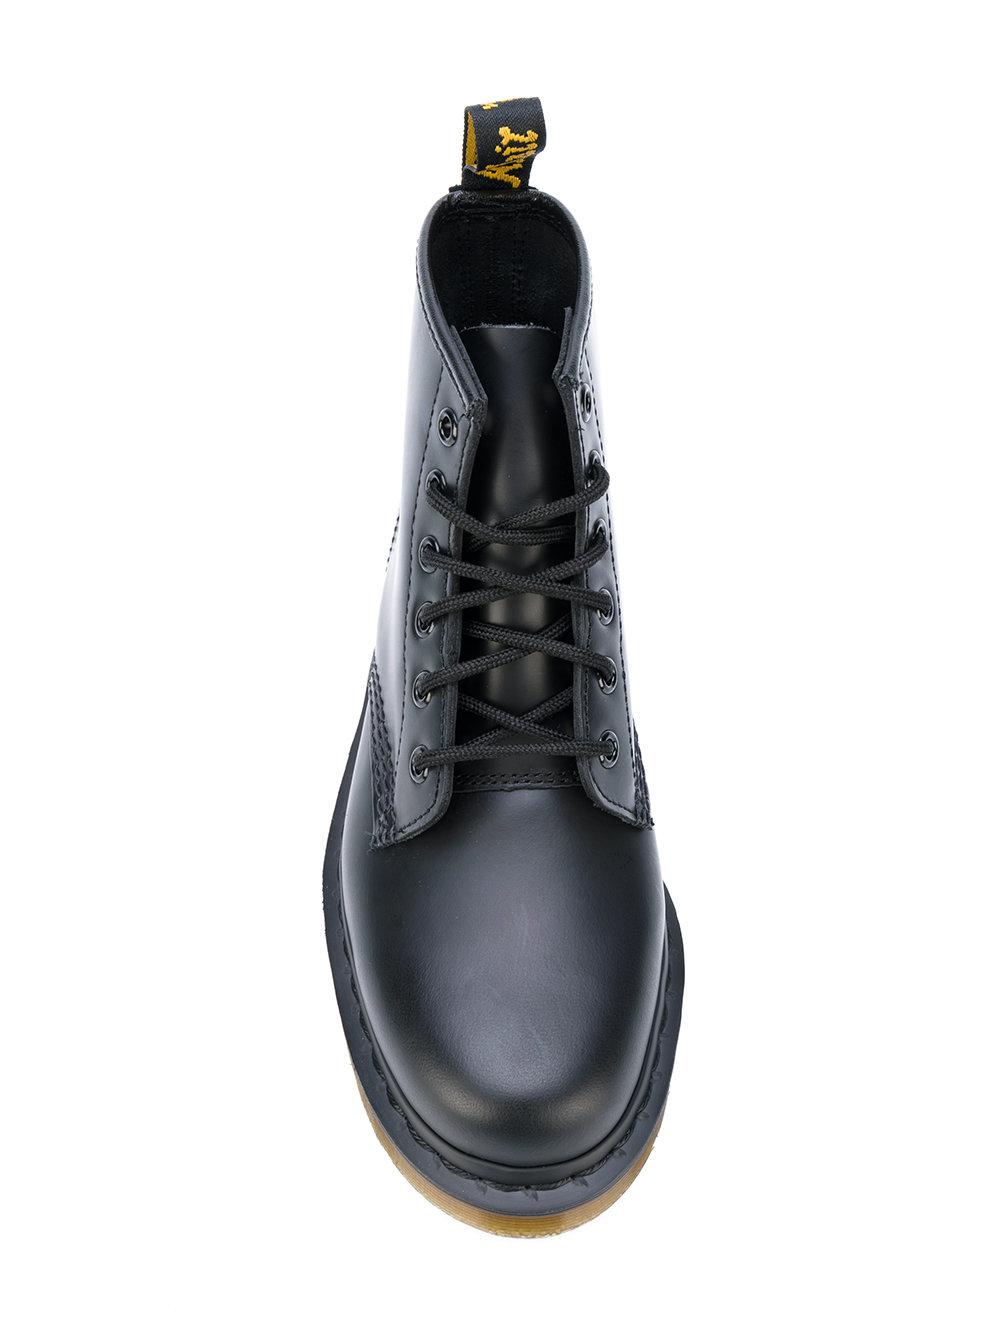 Dr. Martens 101 Smooth Boots in Black | Lyst